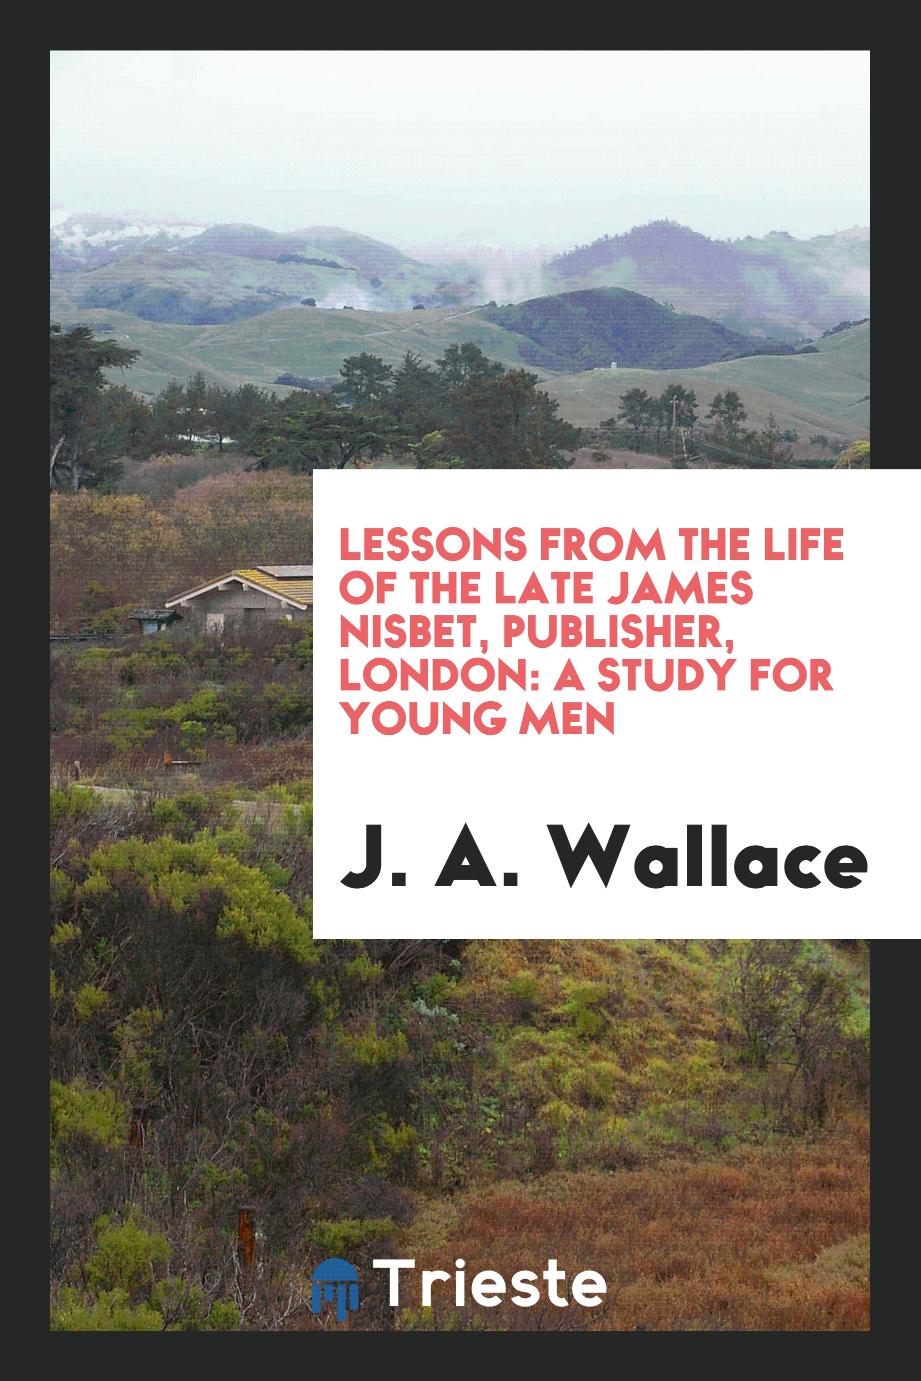 Lessons from the Life of the Late James Nisbet, Publisher, London: A Study for Young Men